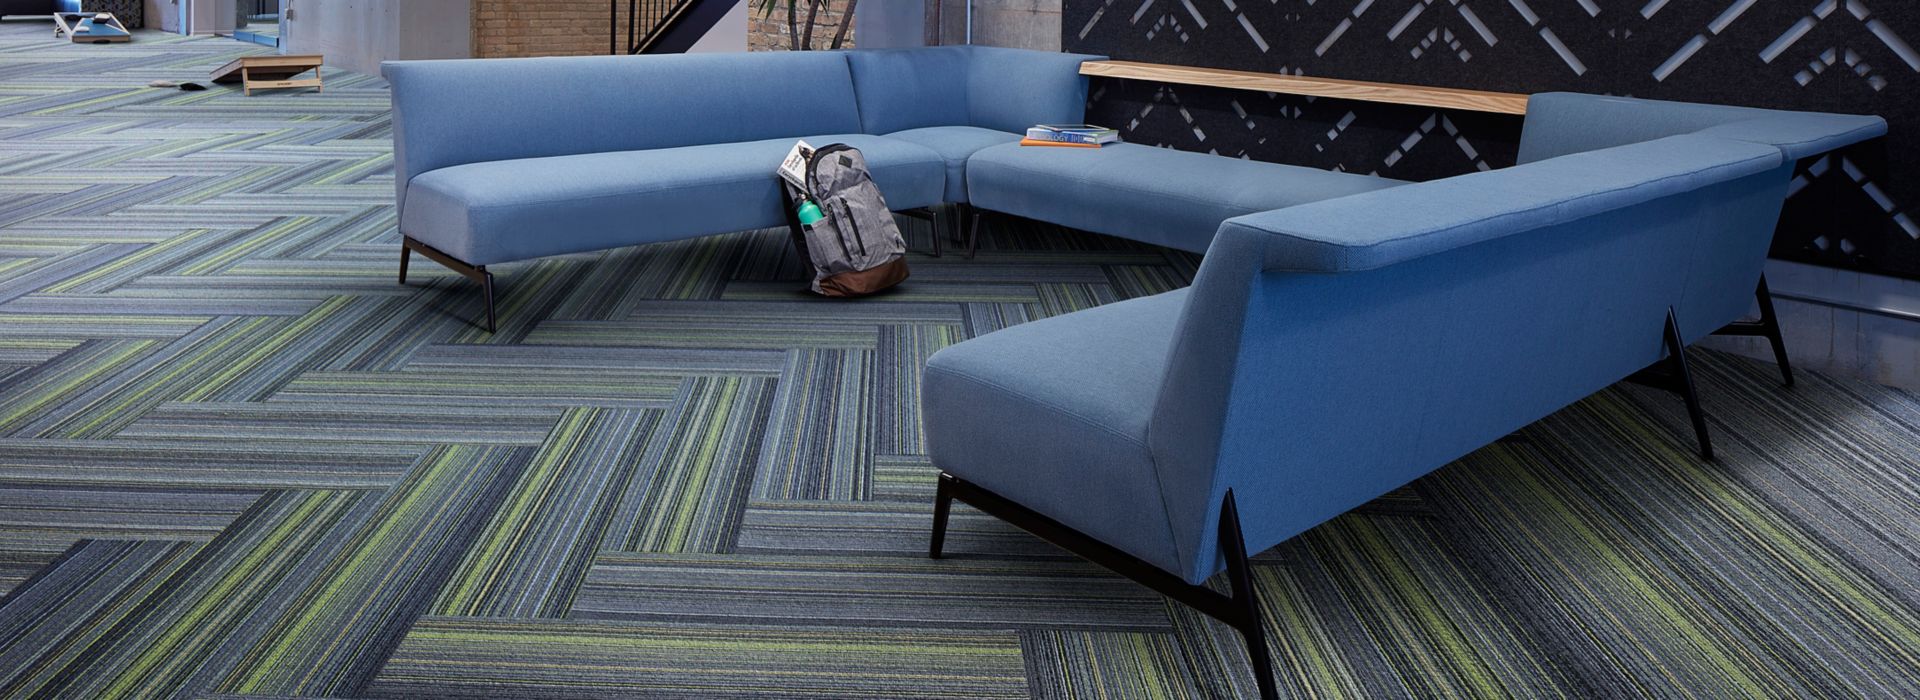 Interface Aglow and Reflectors plank carpet tile in lobby area with blue sectional imagen número 1